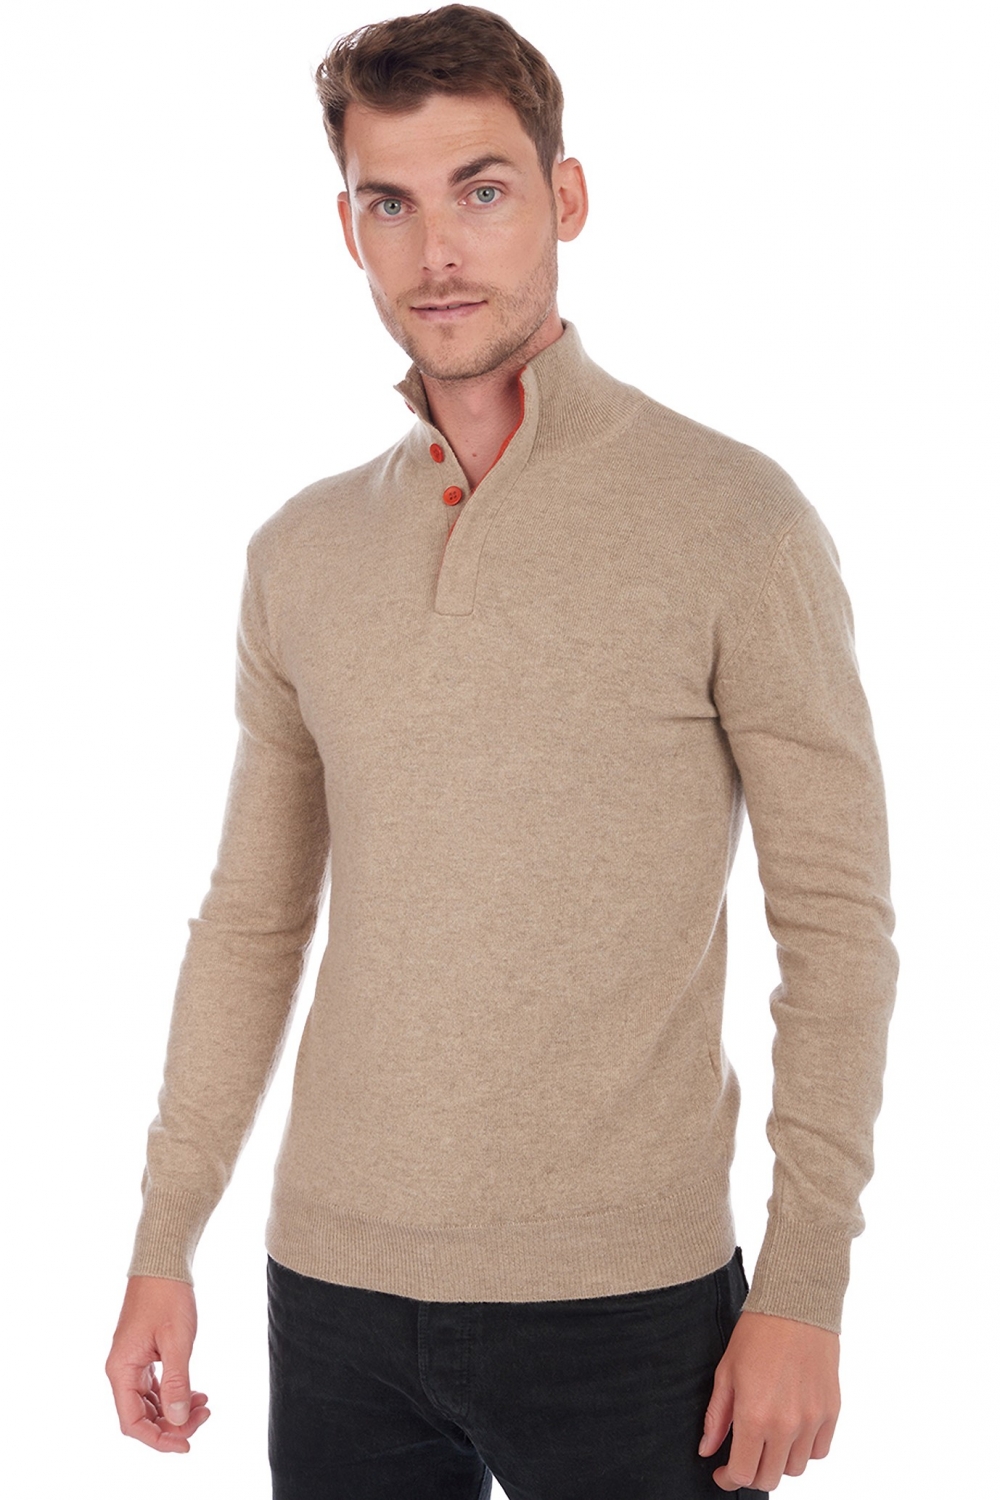 Cachemire pull homme gauvain natural brown paprika xl